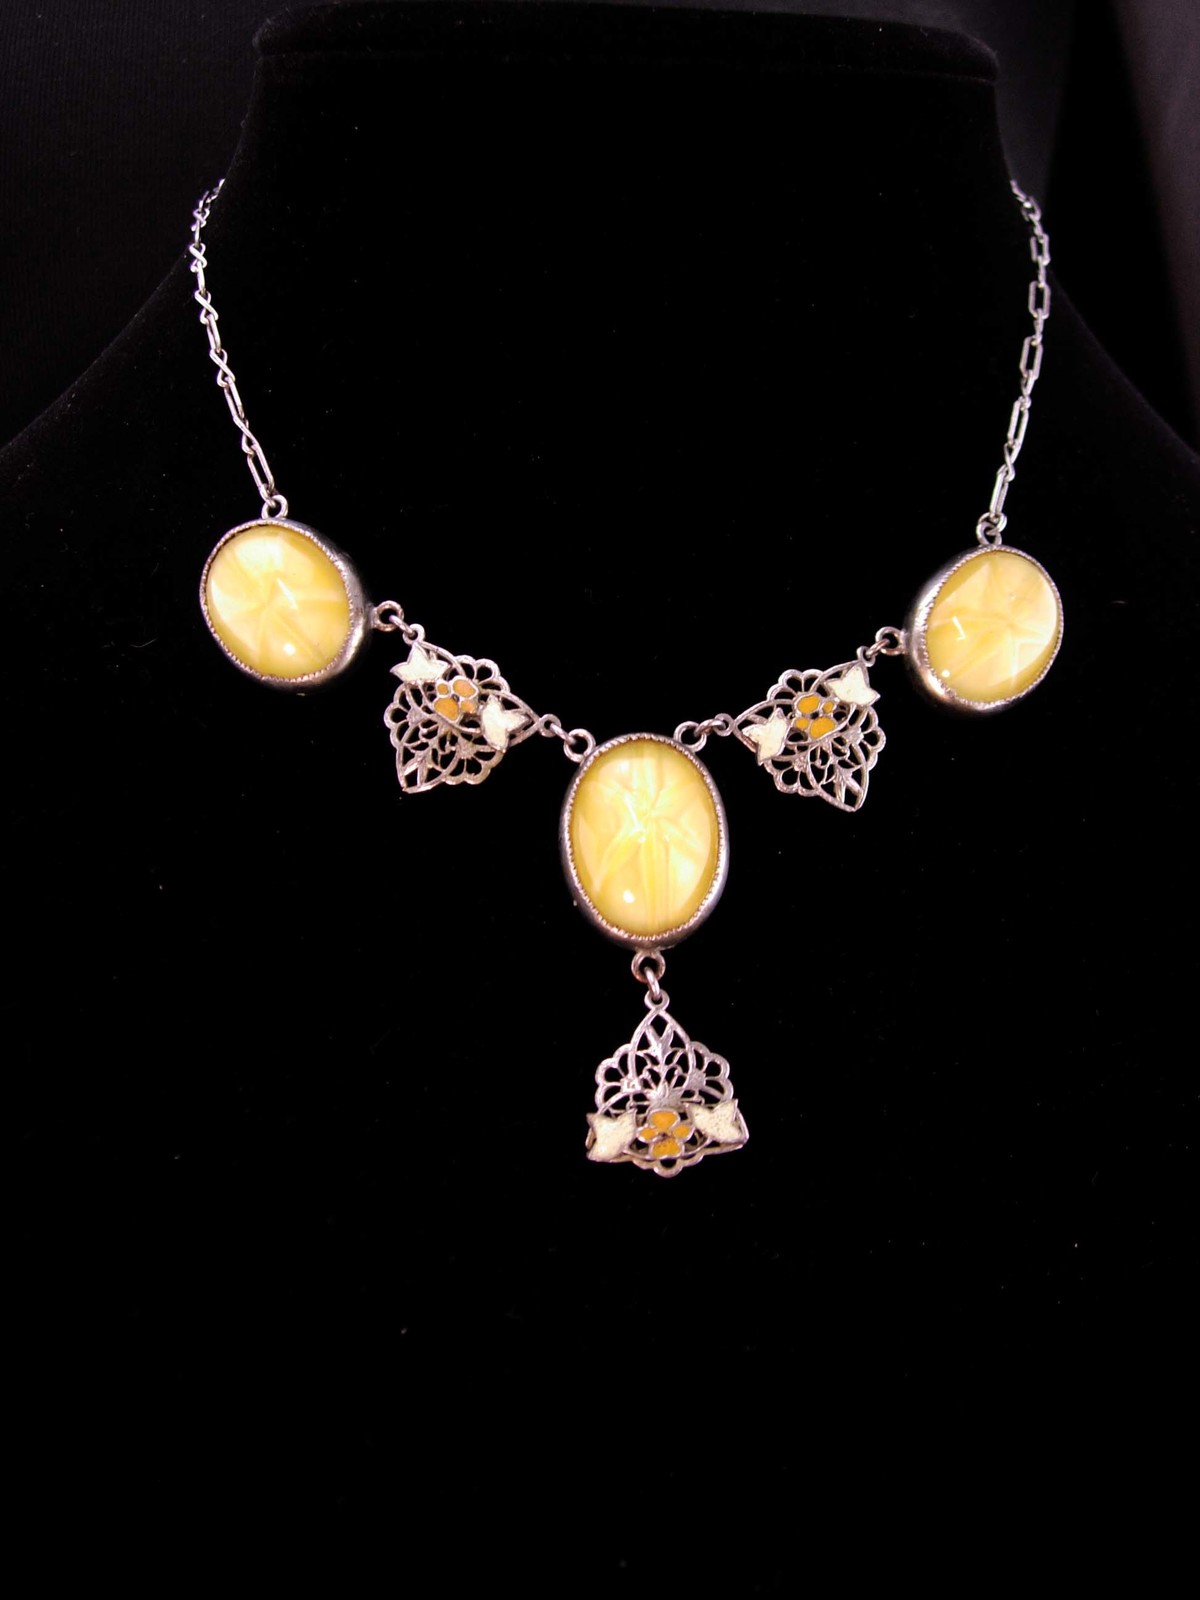 Primary image for Vintage art deco necklace - enamel & faux star sapphire glass - yellow glass wed